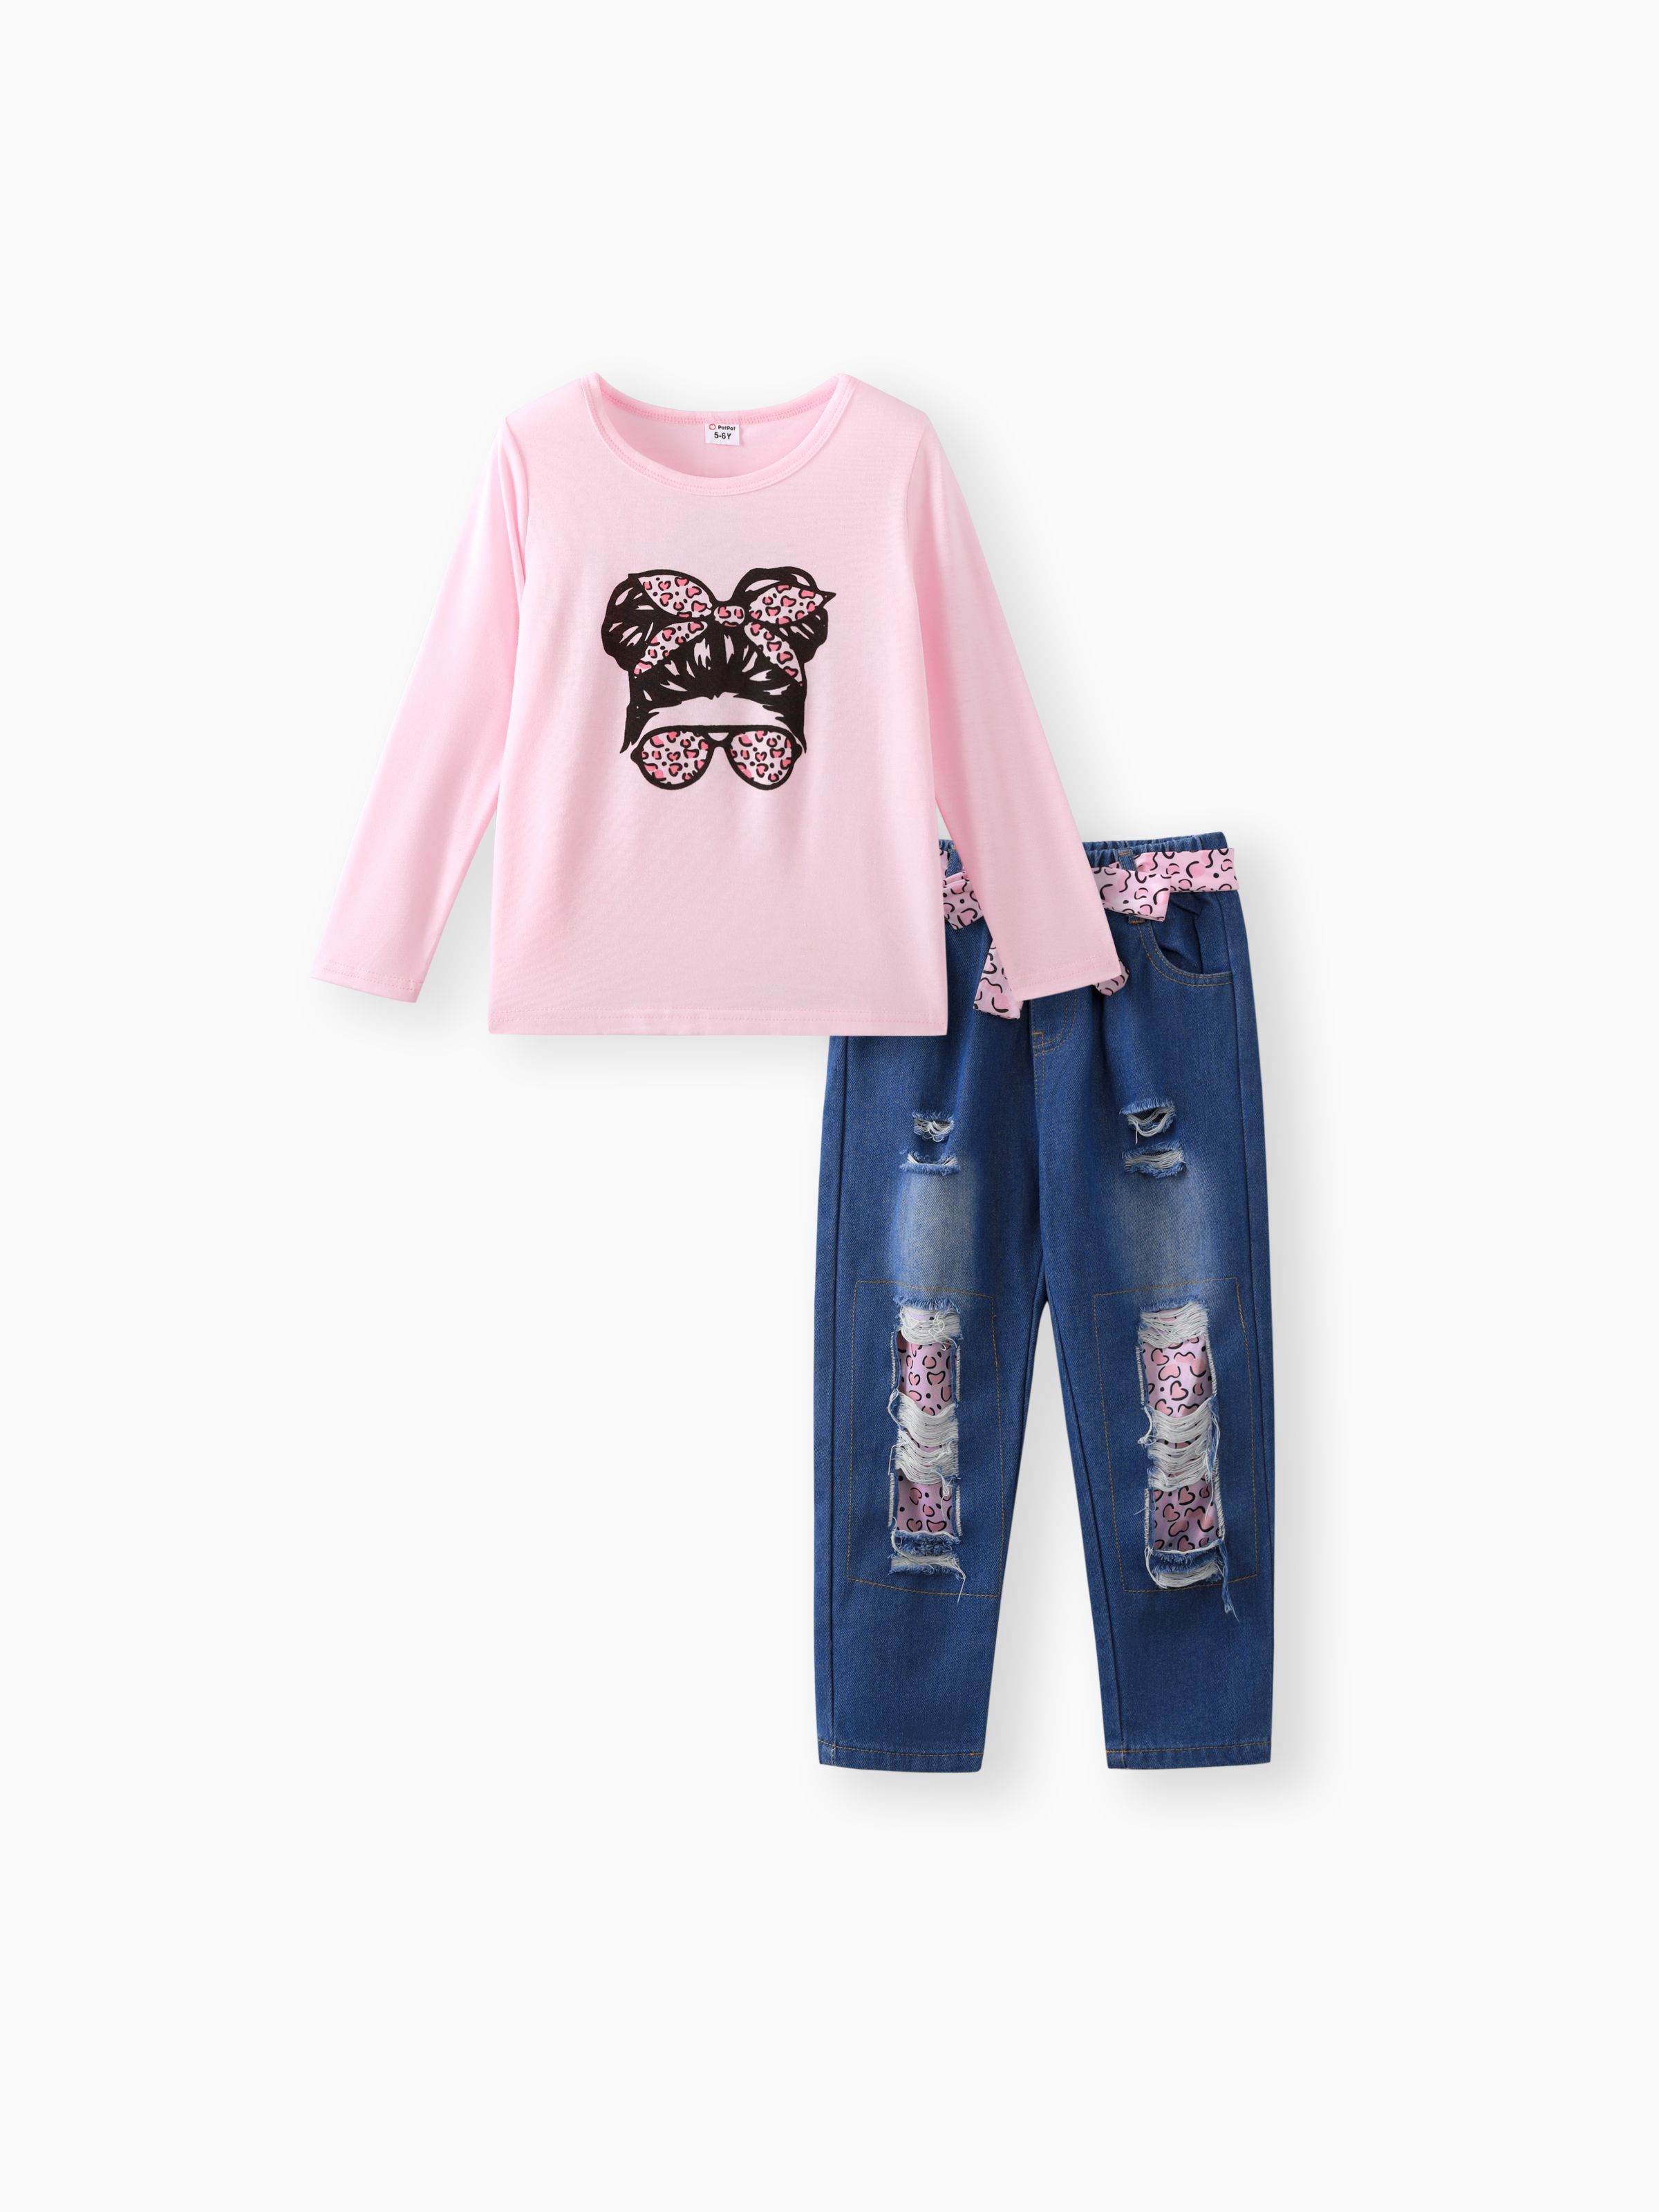 

2pcs Kid Girl Figure Print Long-sleeve Pink Tee and Belted Ripped Denim Jeans Set